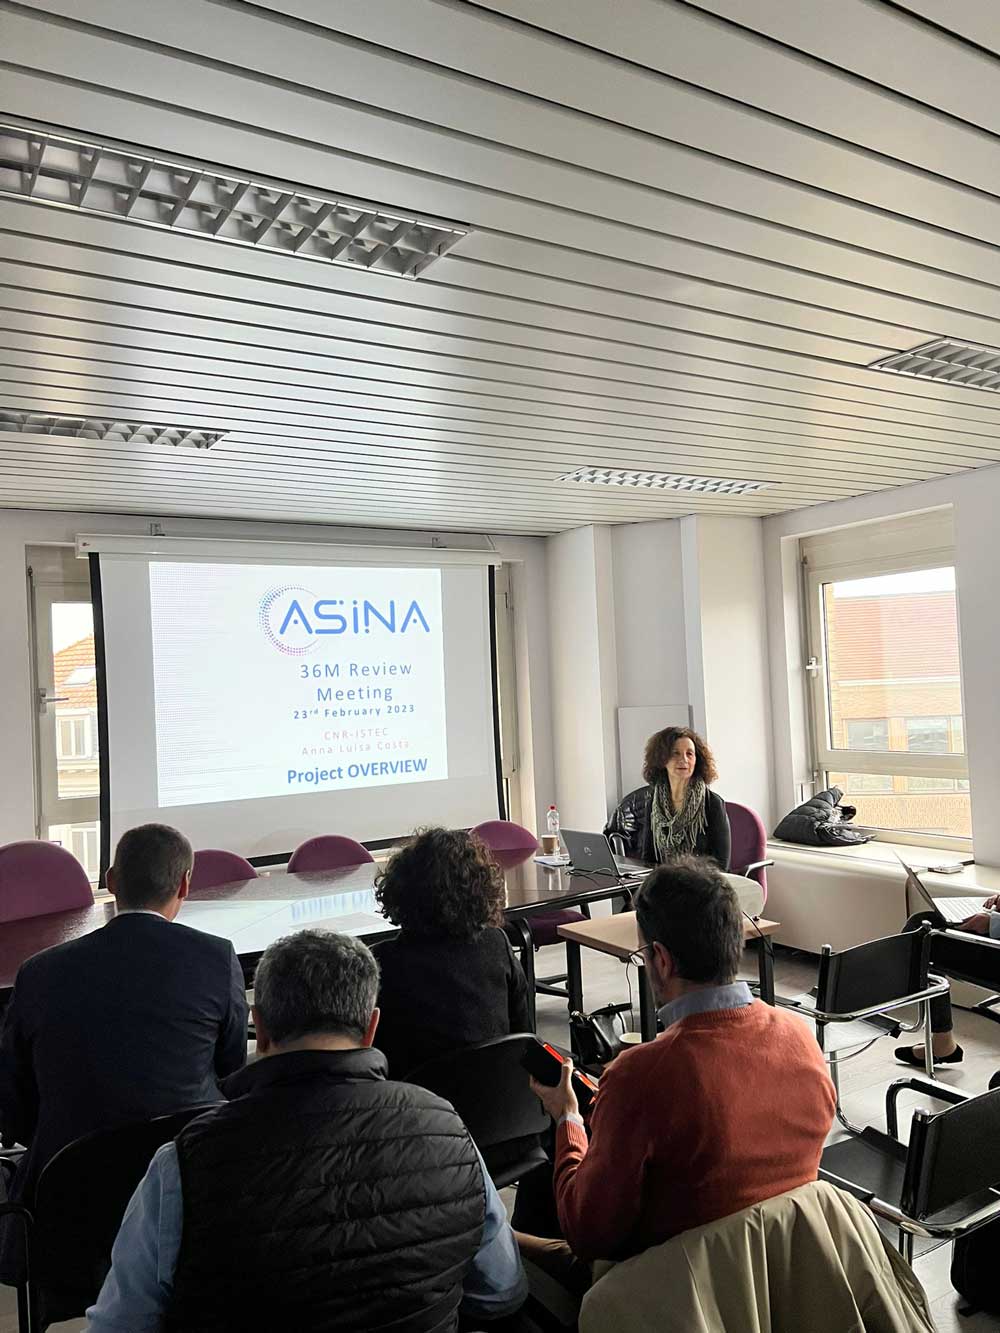 ASINA-36M-Review-Meeting-Presentation-by-Project-Coordinator